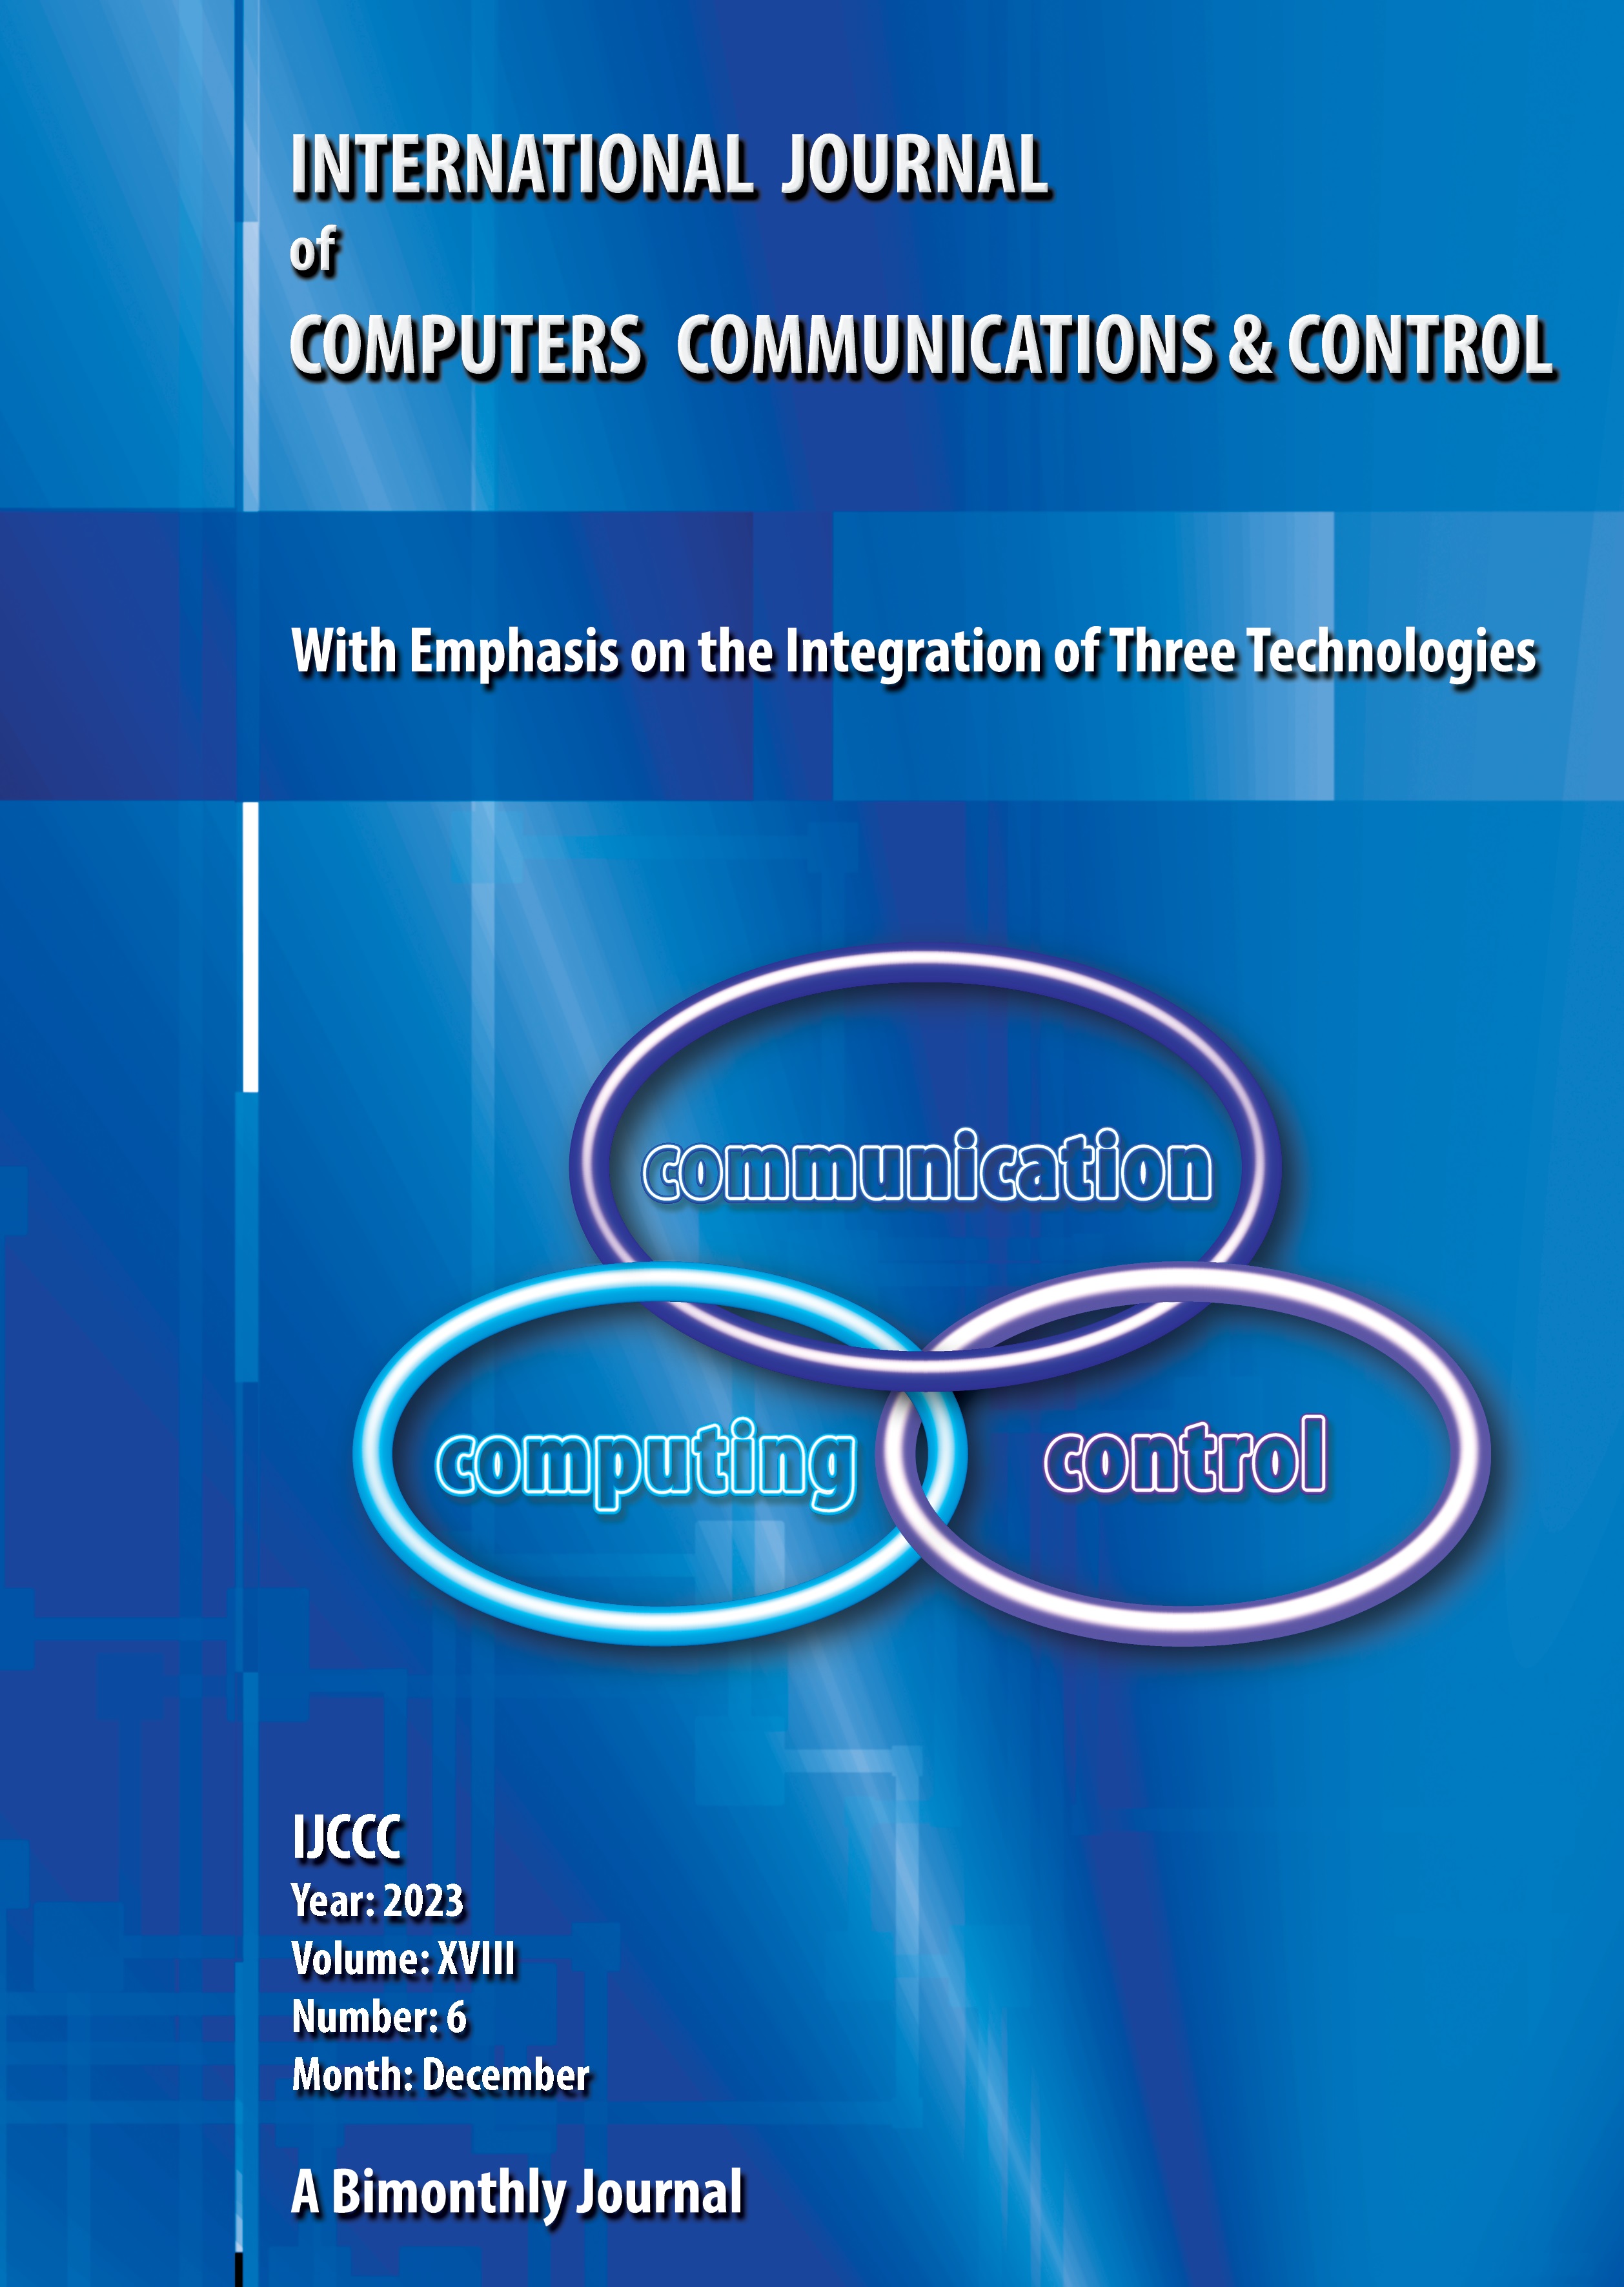 					View Vol. 18 No. 6 (2023): International Journal of Computers Communications & Control (December)
				